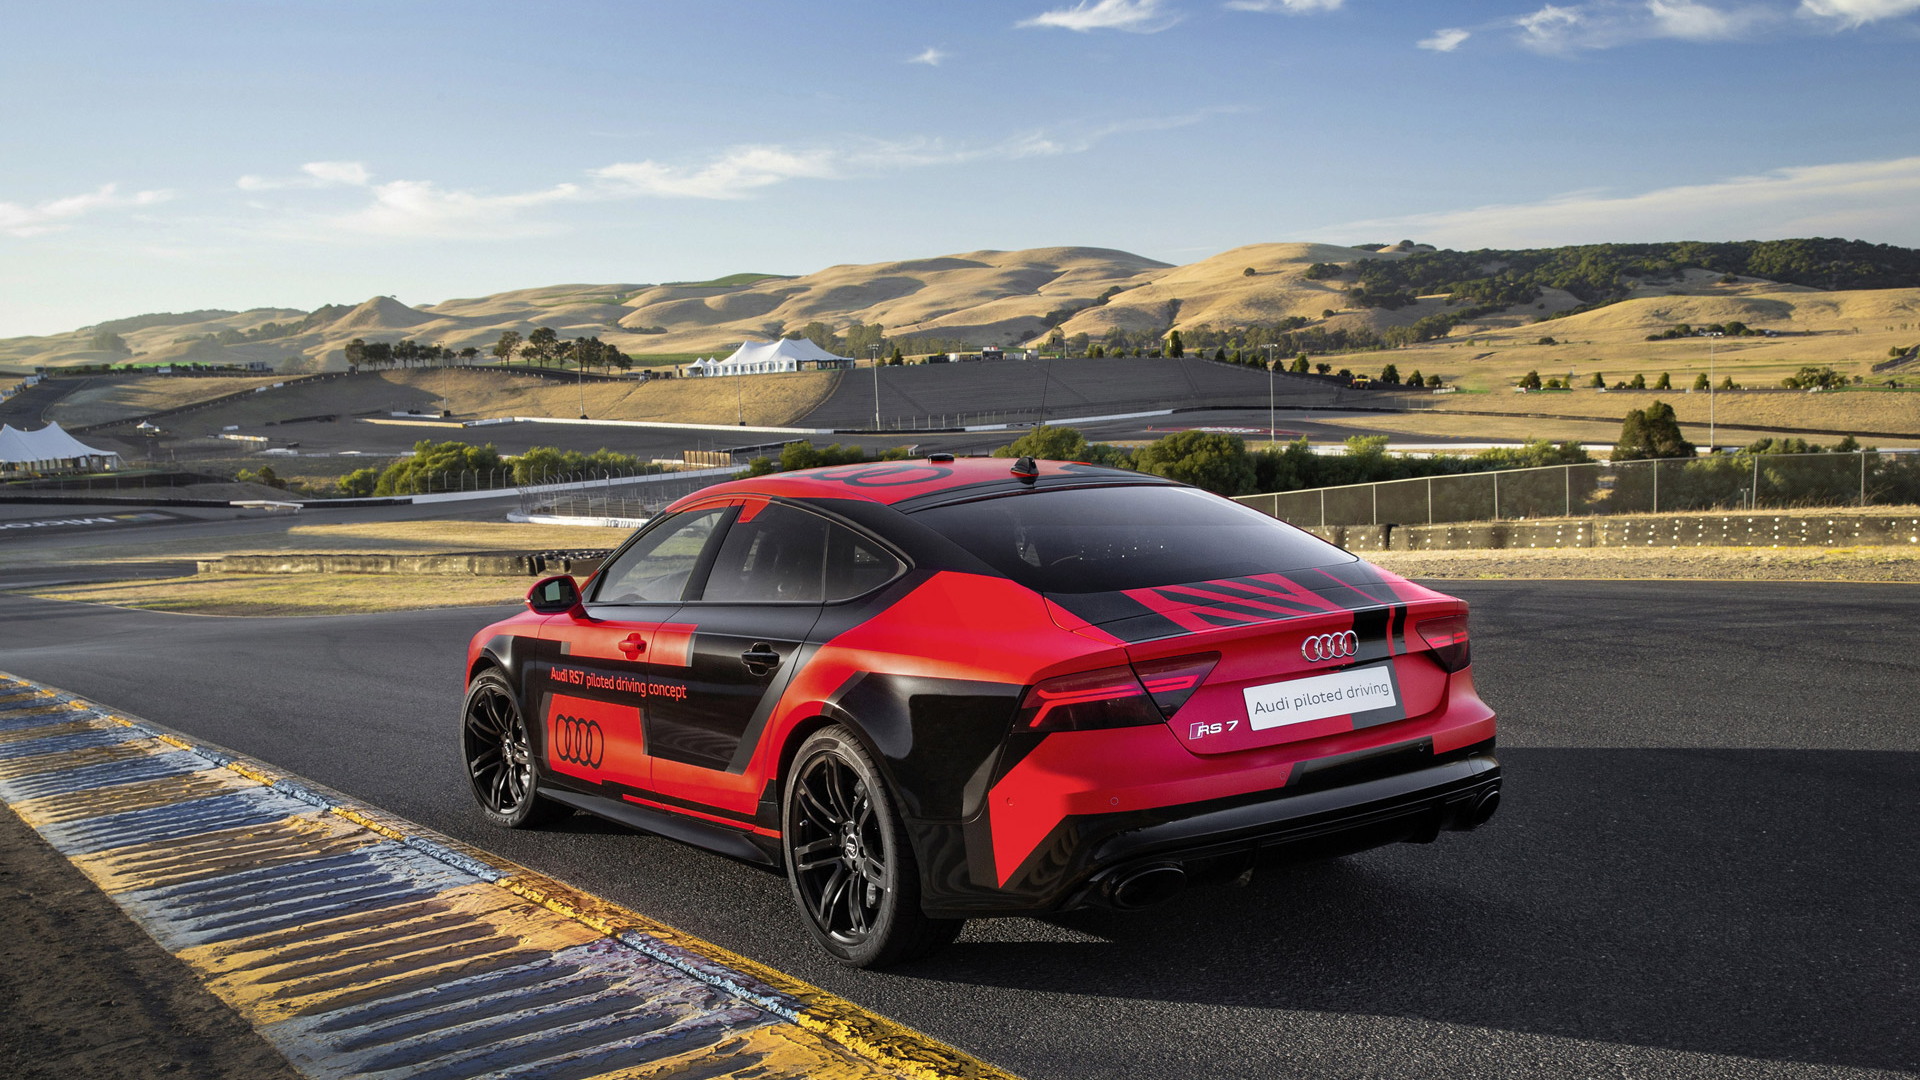 Audi RS 7 Piloted Driving concept at Sonoma Raceway, July 2015